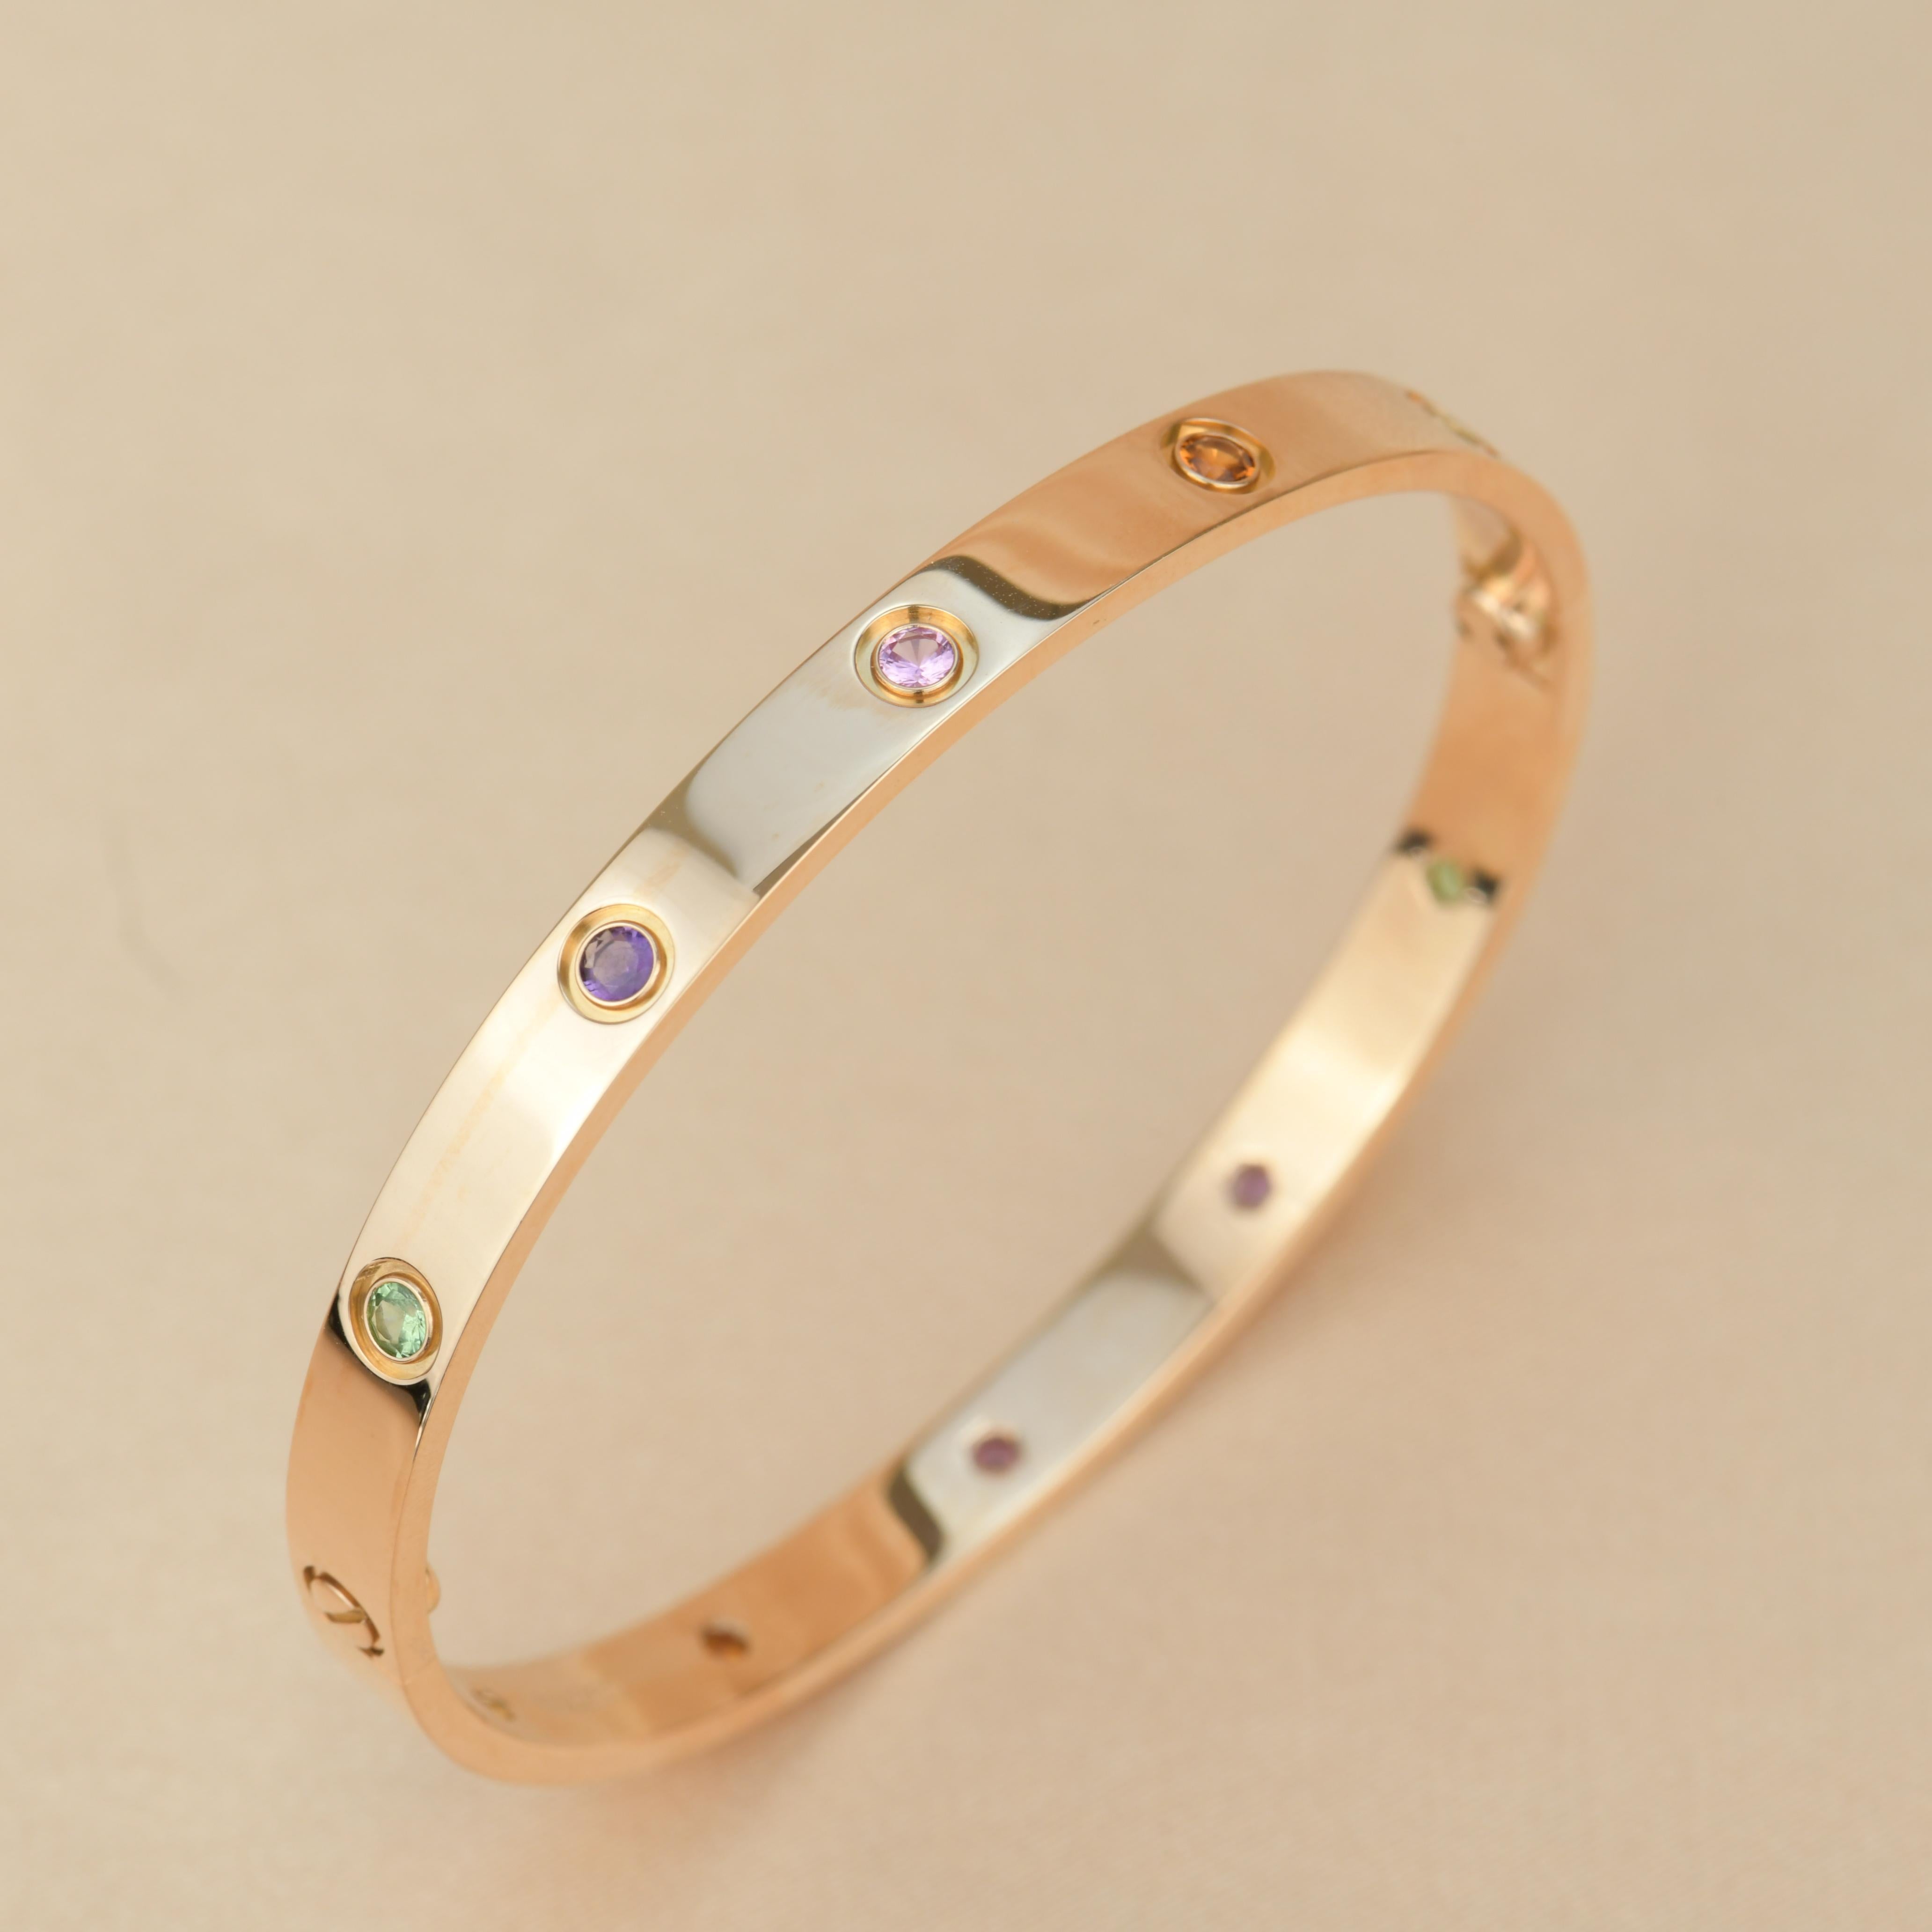 LOVE bracelet, 18K rose gold, set with 2 pink sapphires, 2 yellow sapphires, 2 green garnets, 2 orange garnets, and 2 amethysts. 
Comes with Cartier Box / Authentic card. Size 19
__________________________________

Dandelion Antiques Code